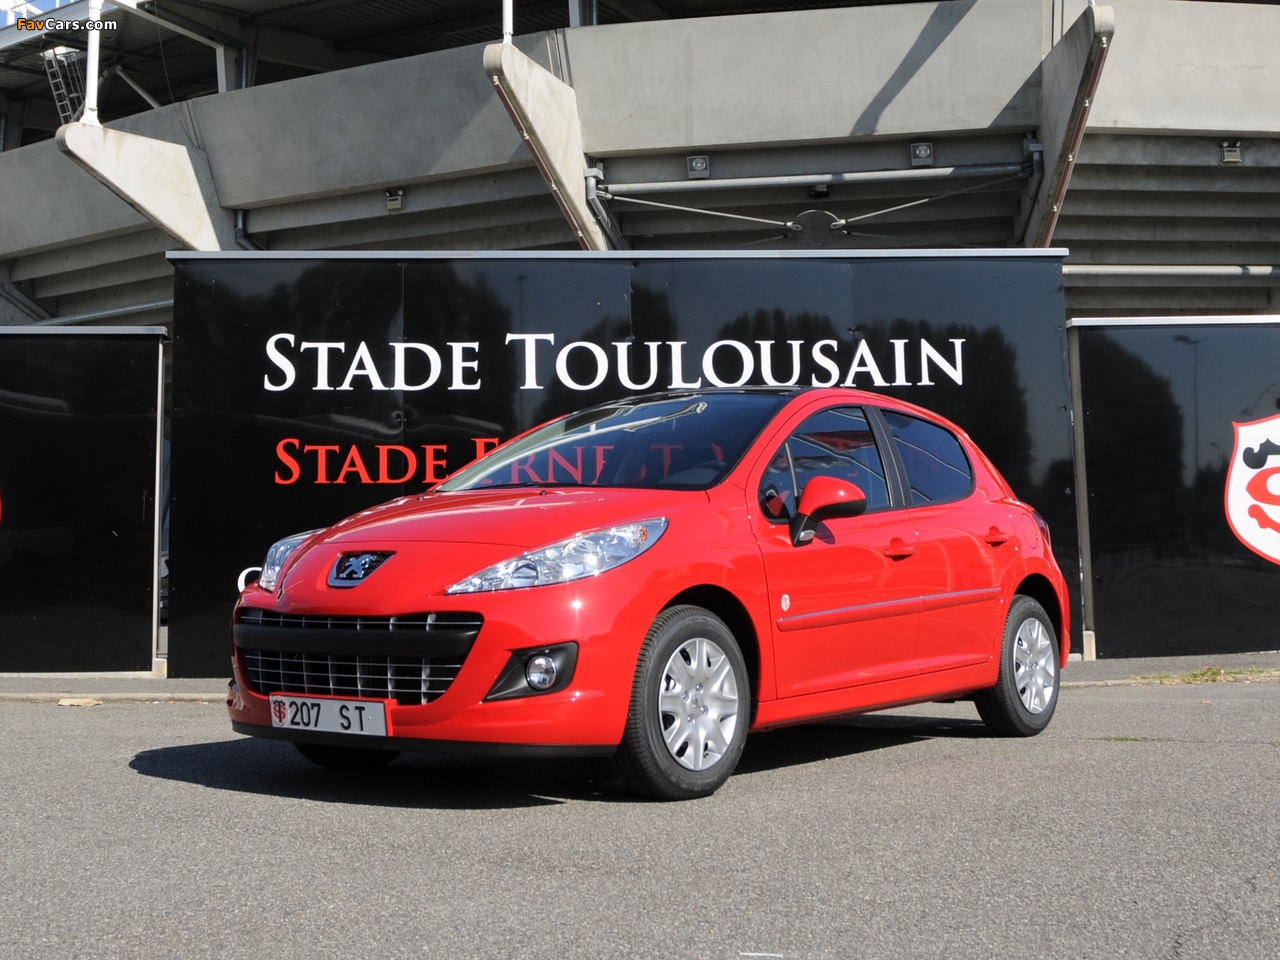 Pictures of Peugeot 207 Stade Toulousain 2011 (1280 x 960)